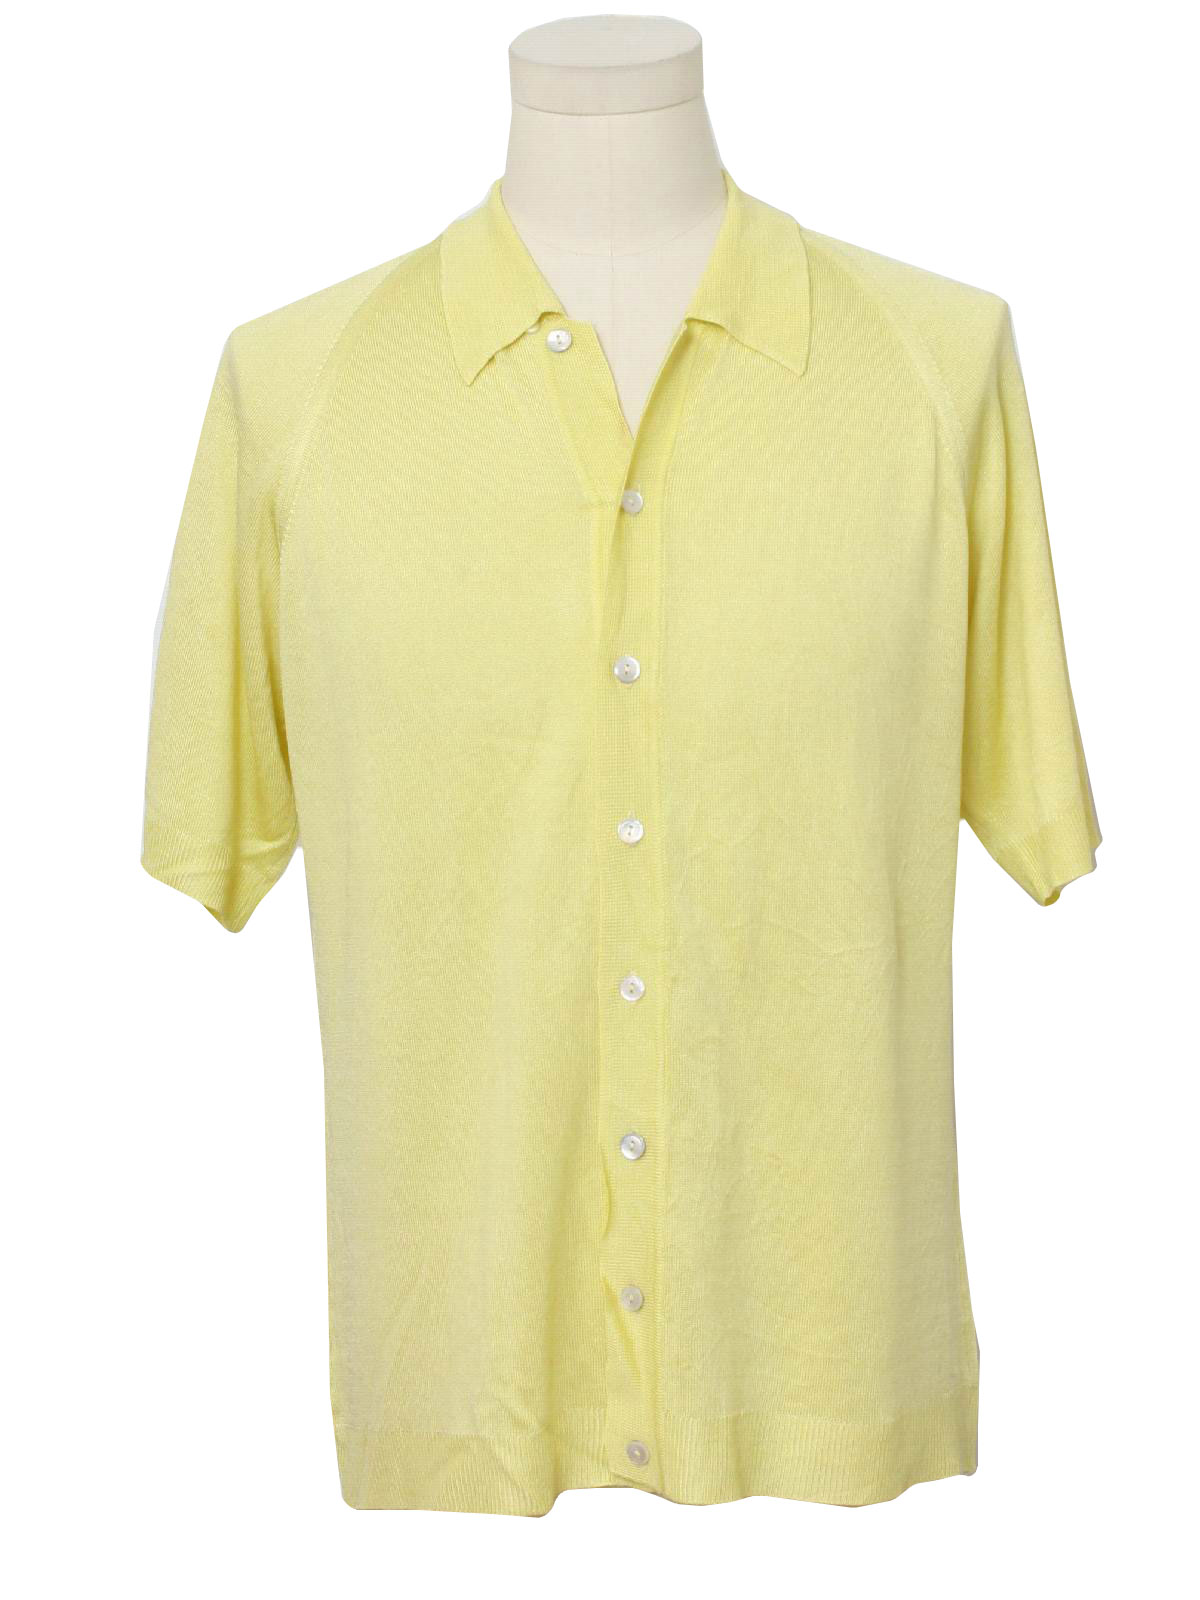 1970's Retro Knit Shirt: 70s -Made in Italy- Mens sheeny butter yellow ...